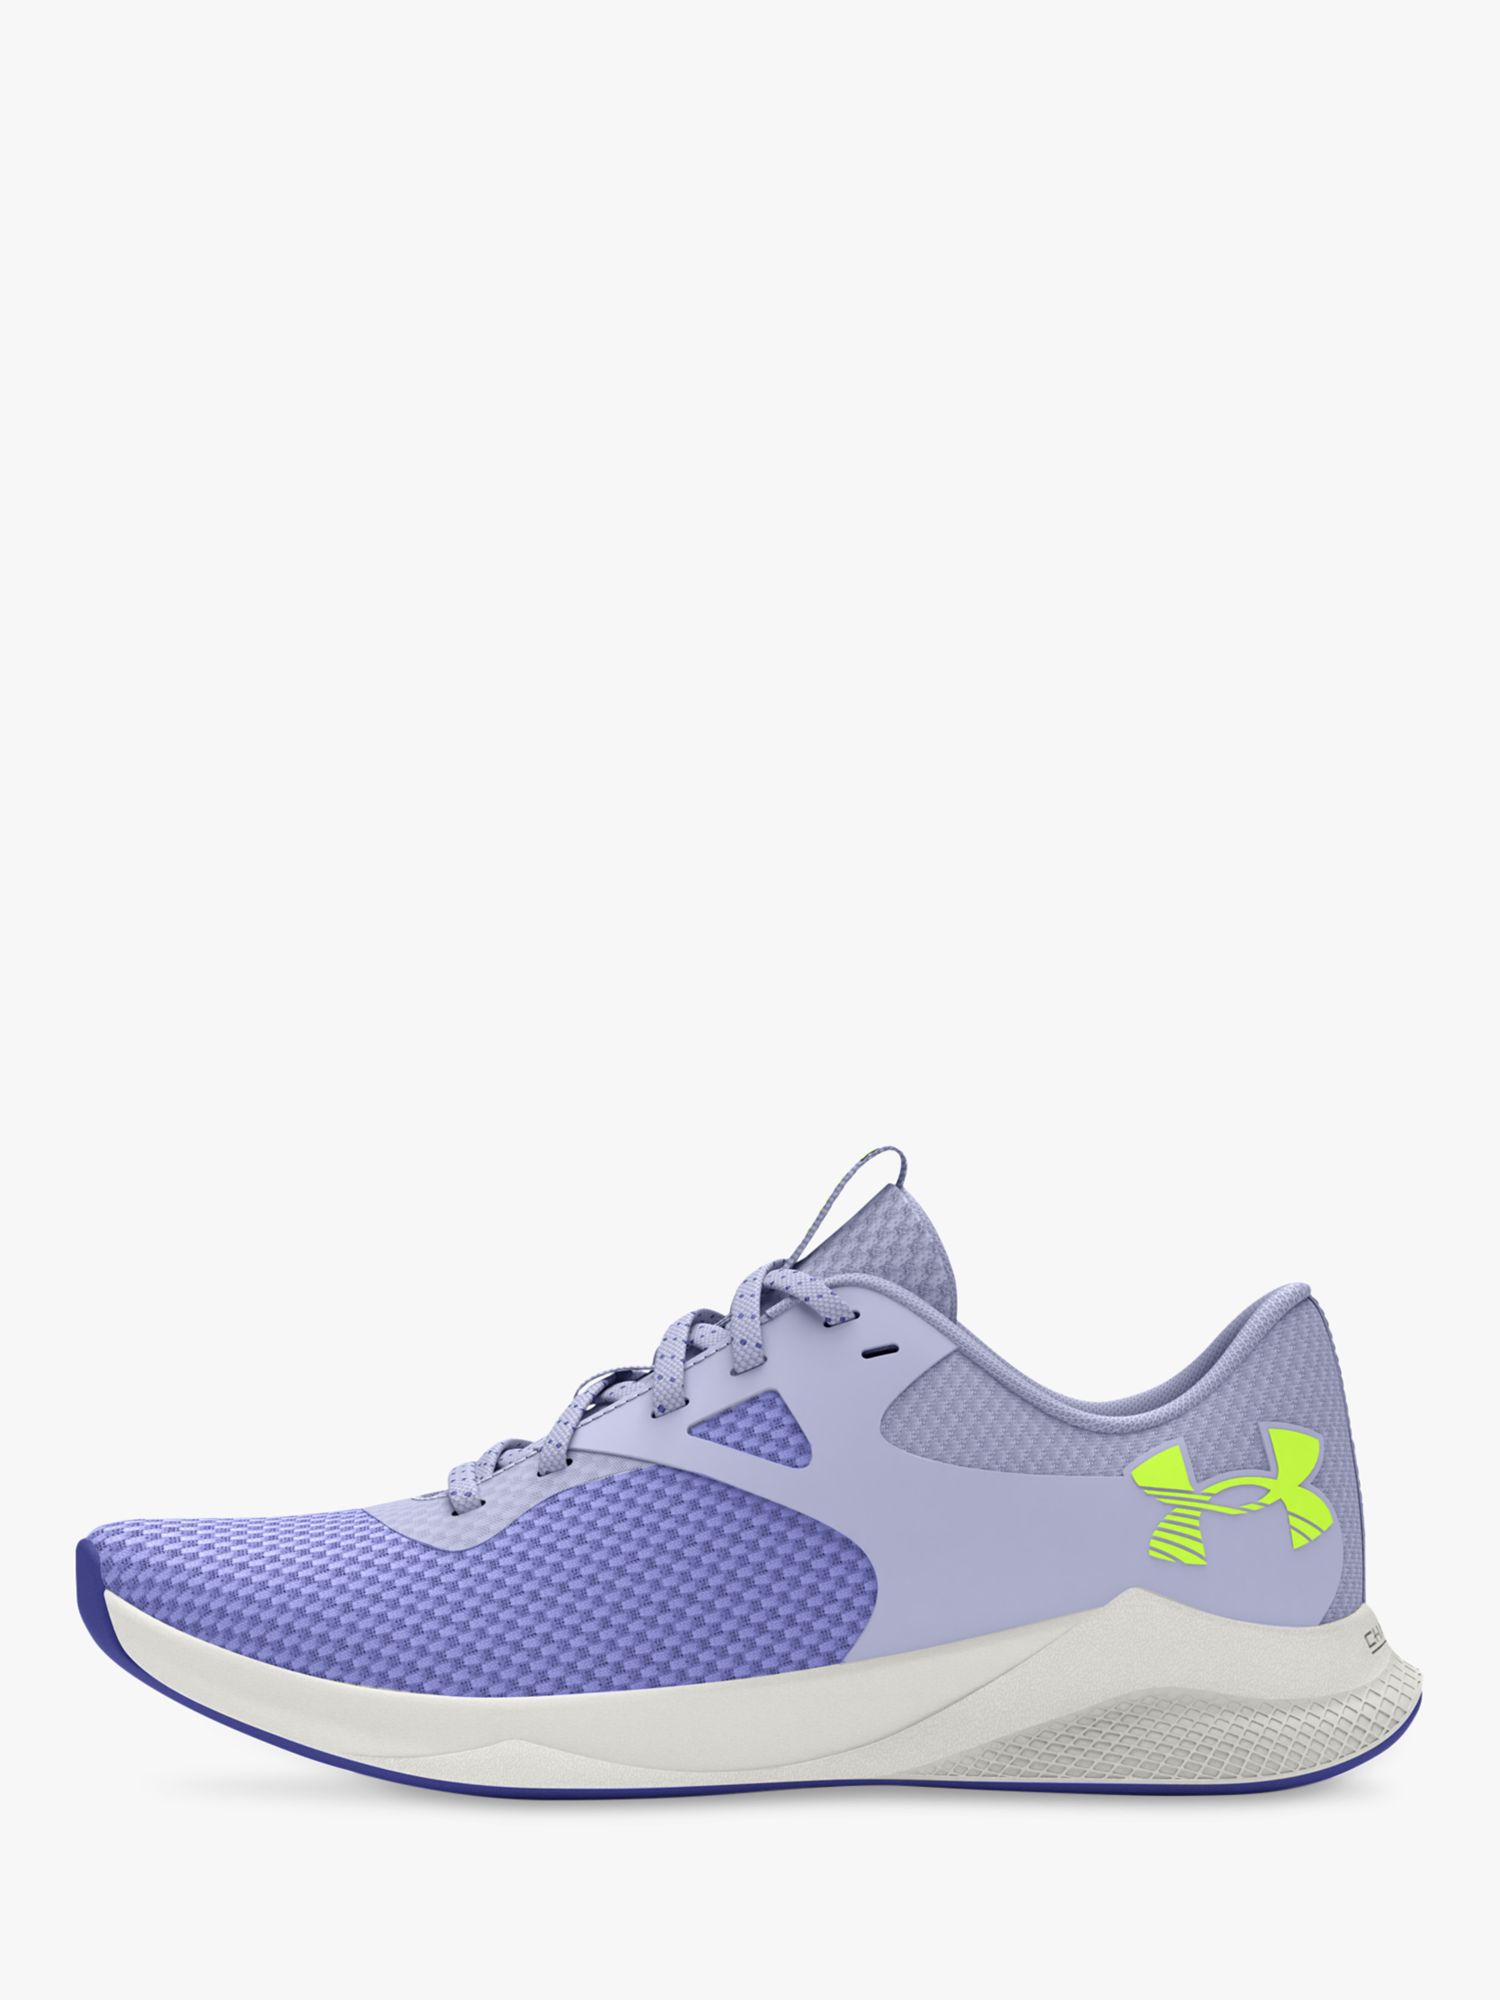 Buy Under Armour Women's Charged Aurora 2 Trainers Online at johnlewis.com